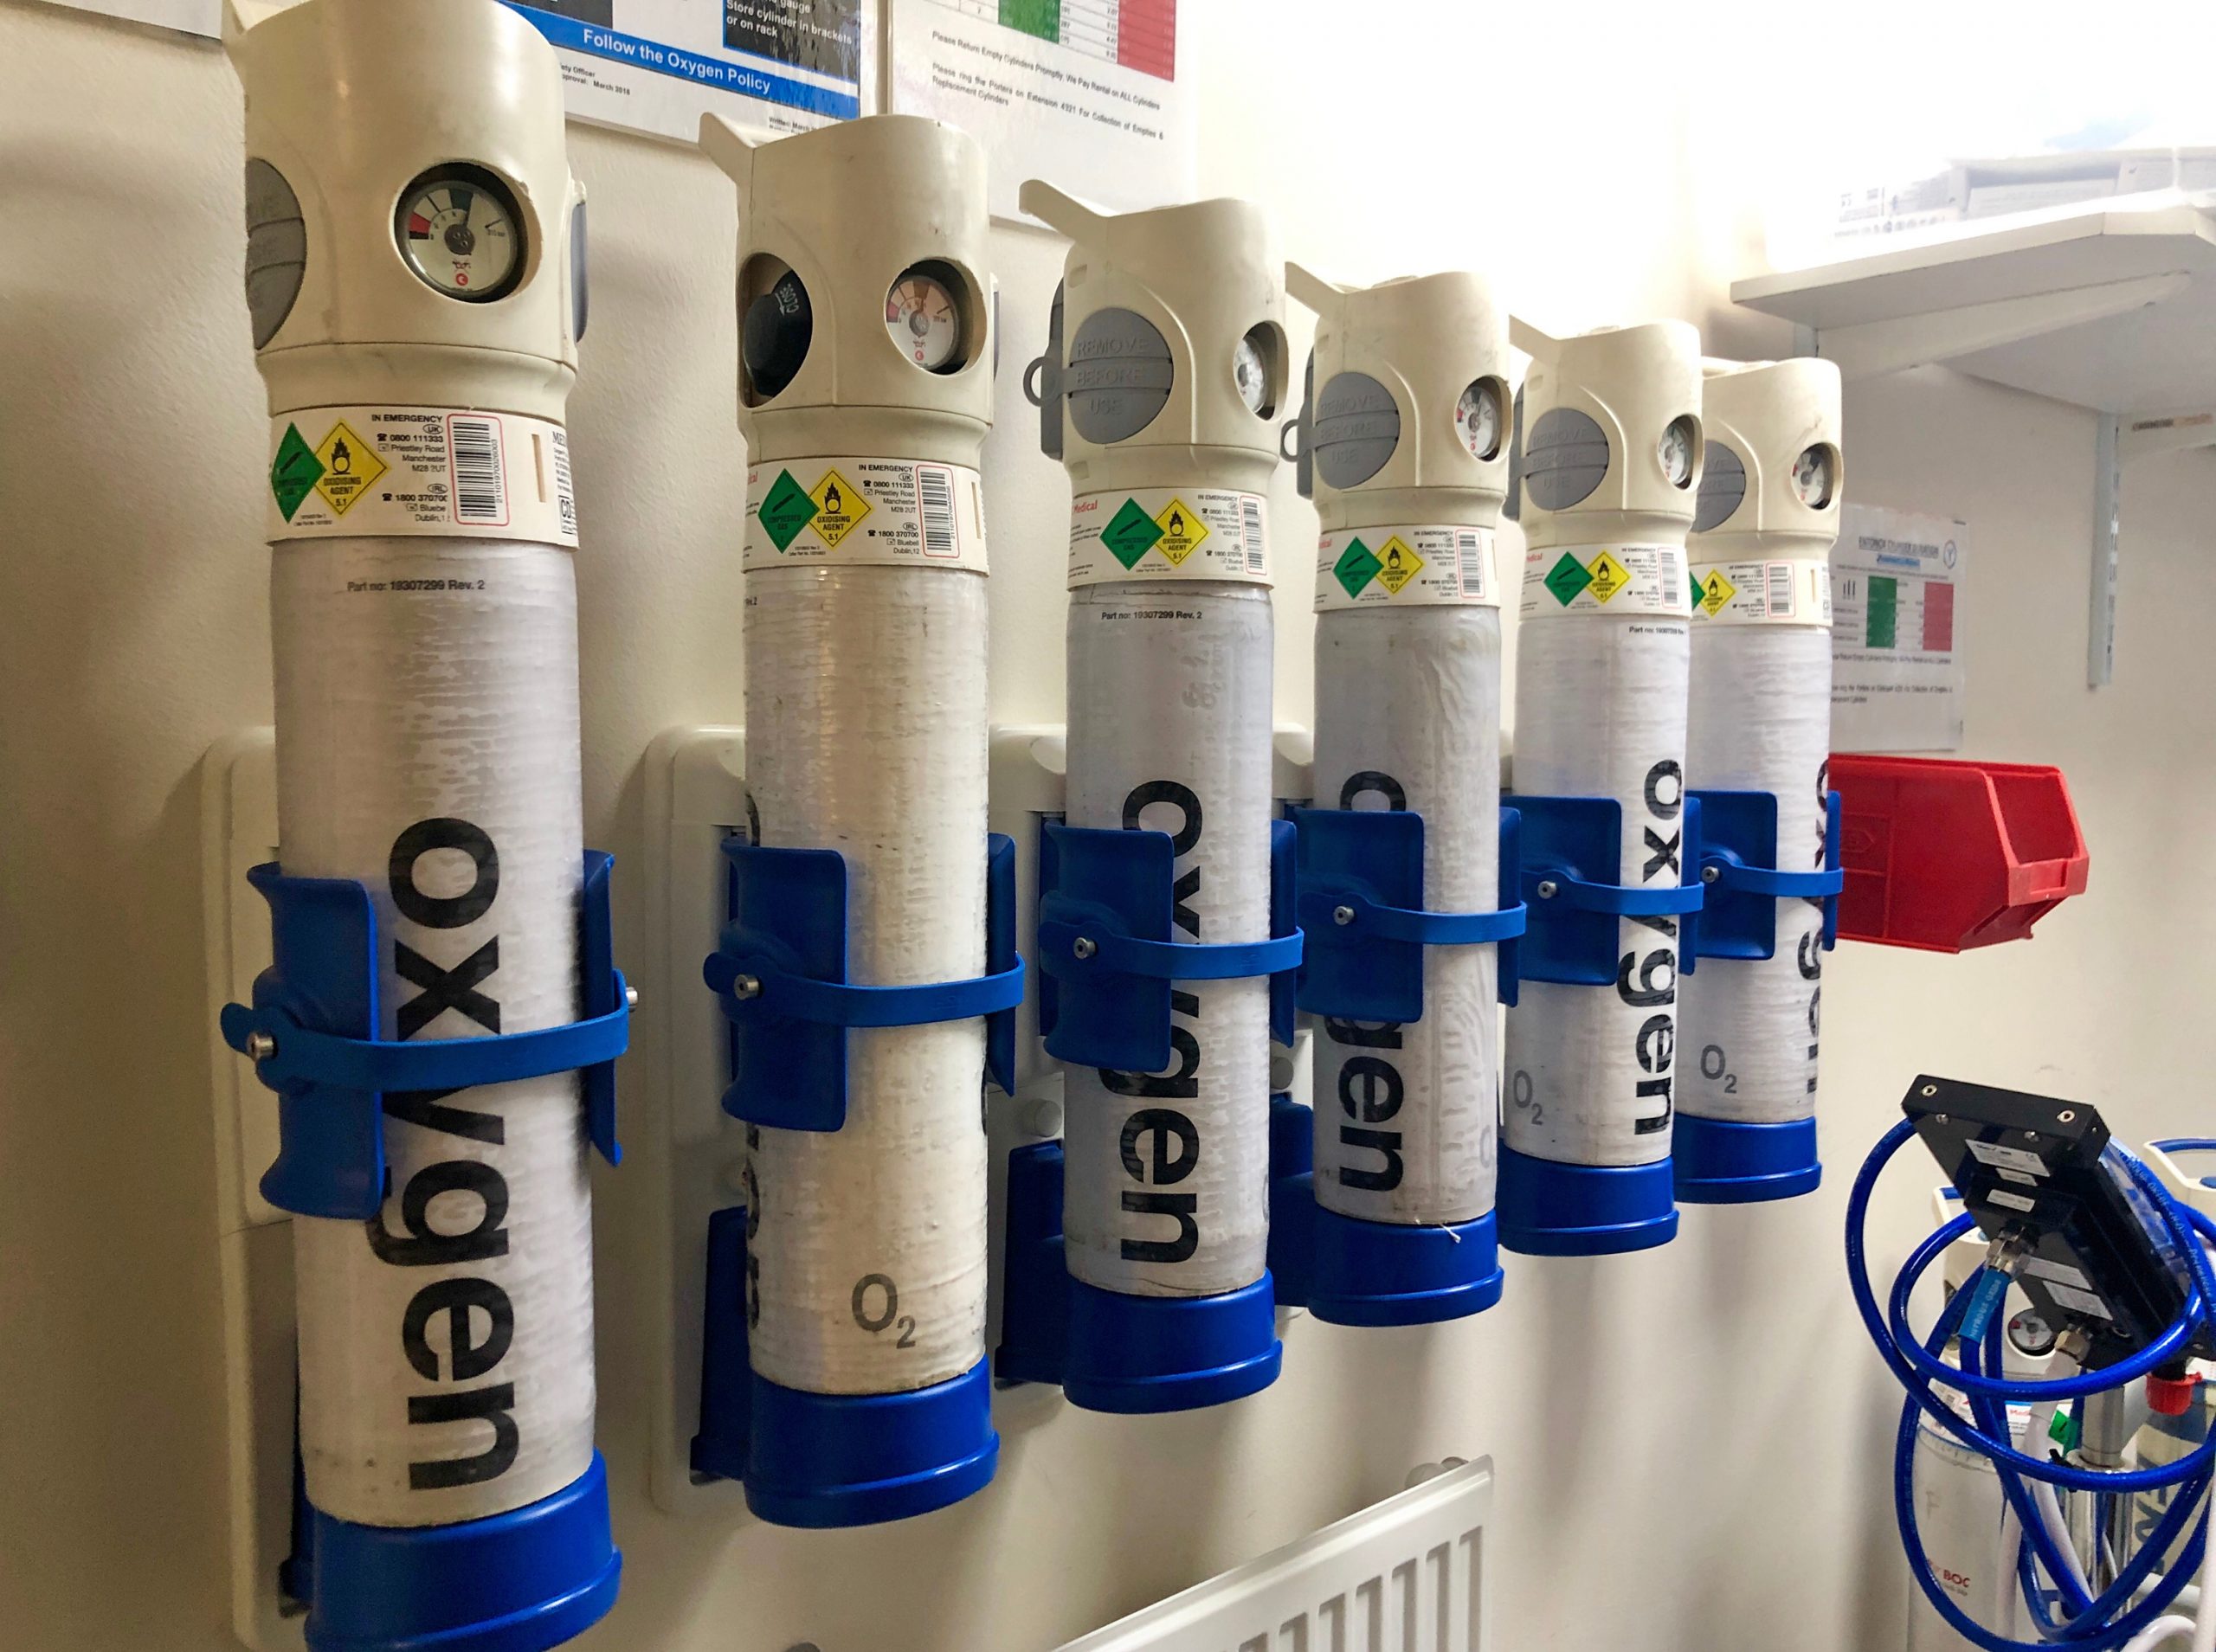 inotec labels supporting covid-19